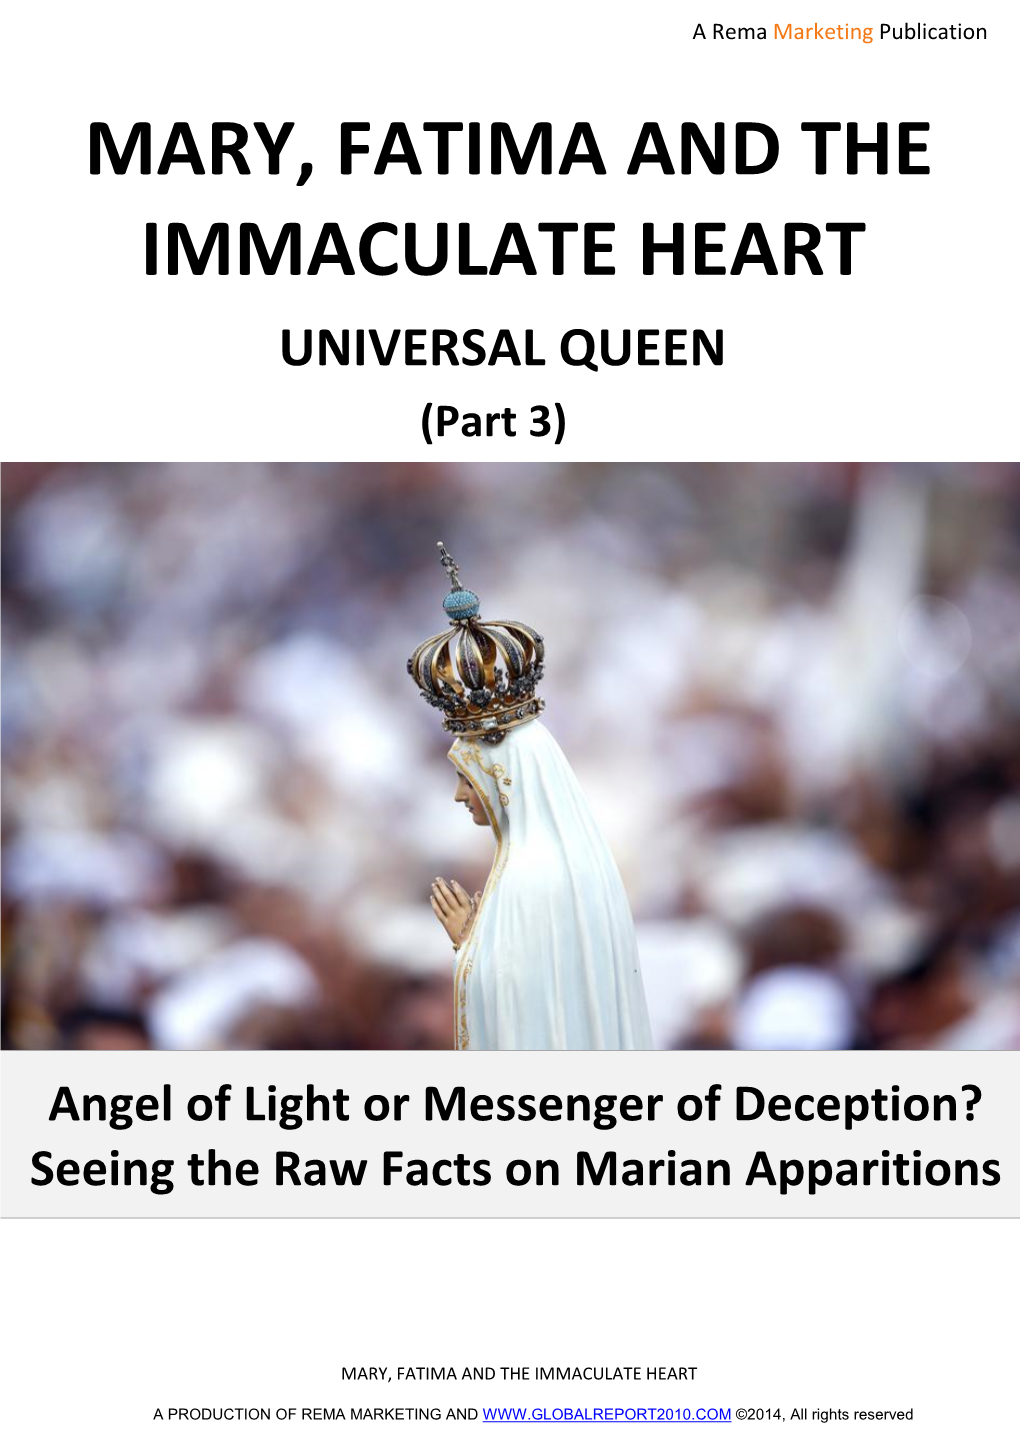 Mary, Fatima and the Immaculate Heart